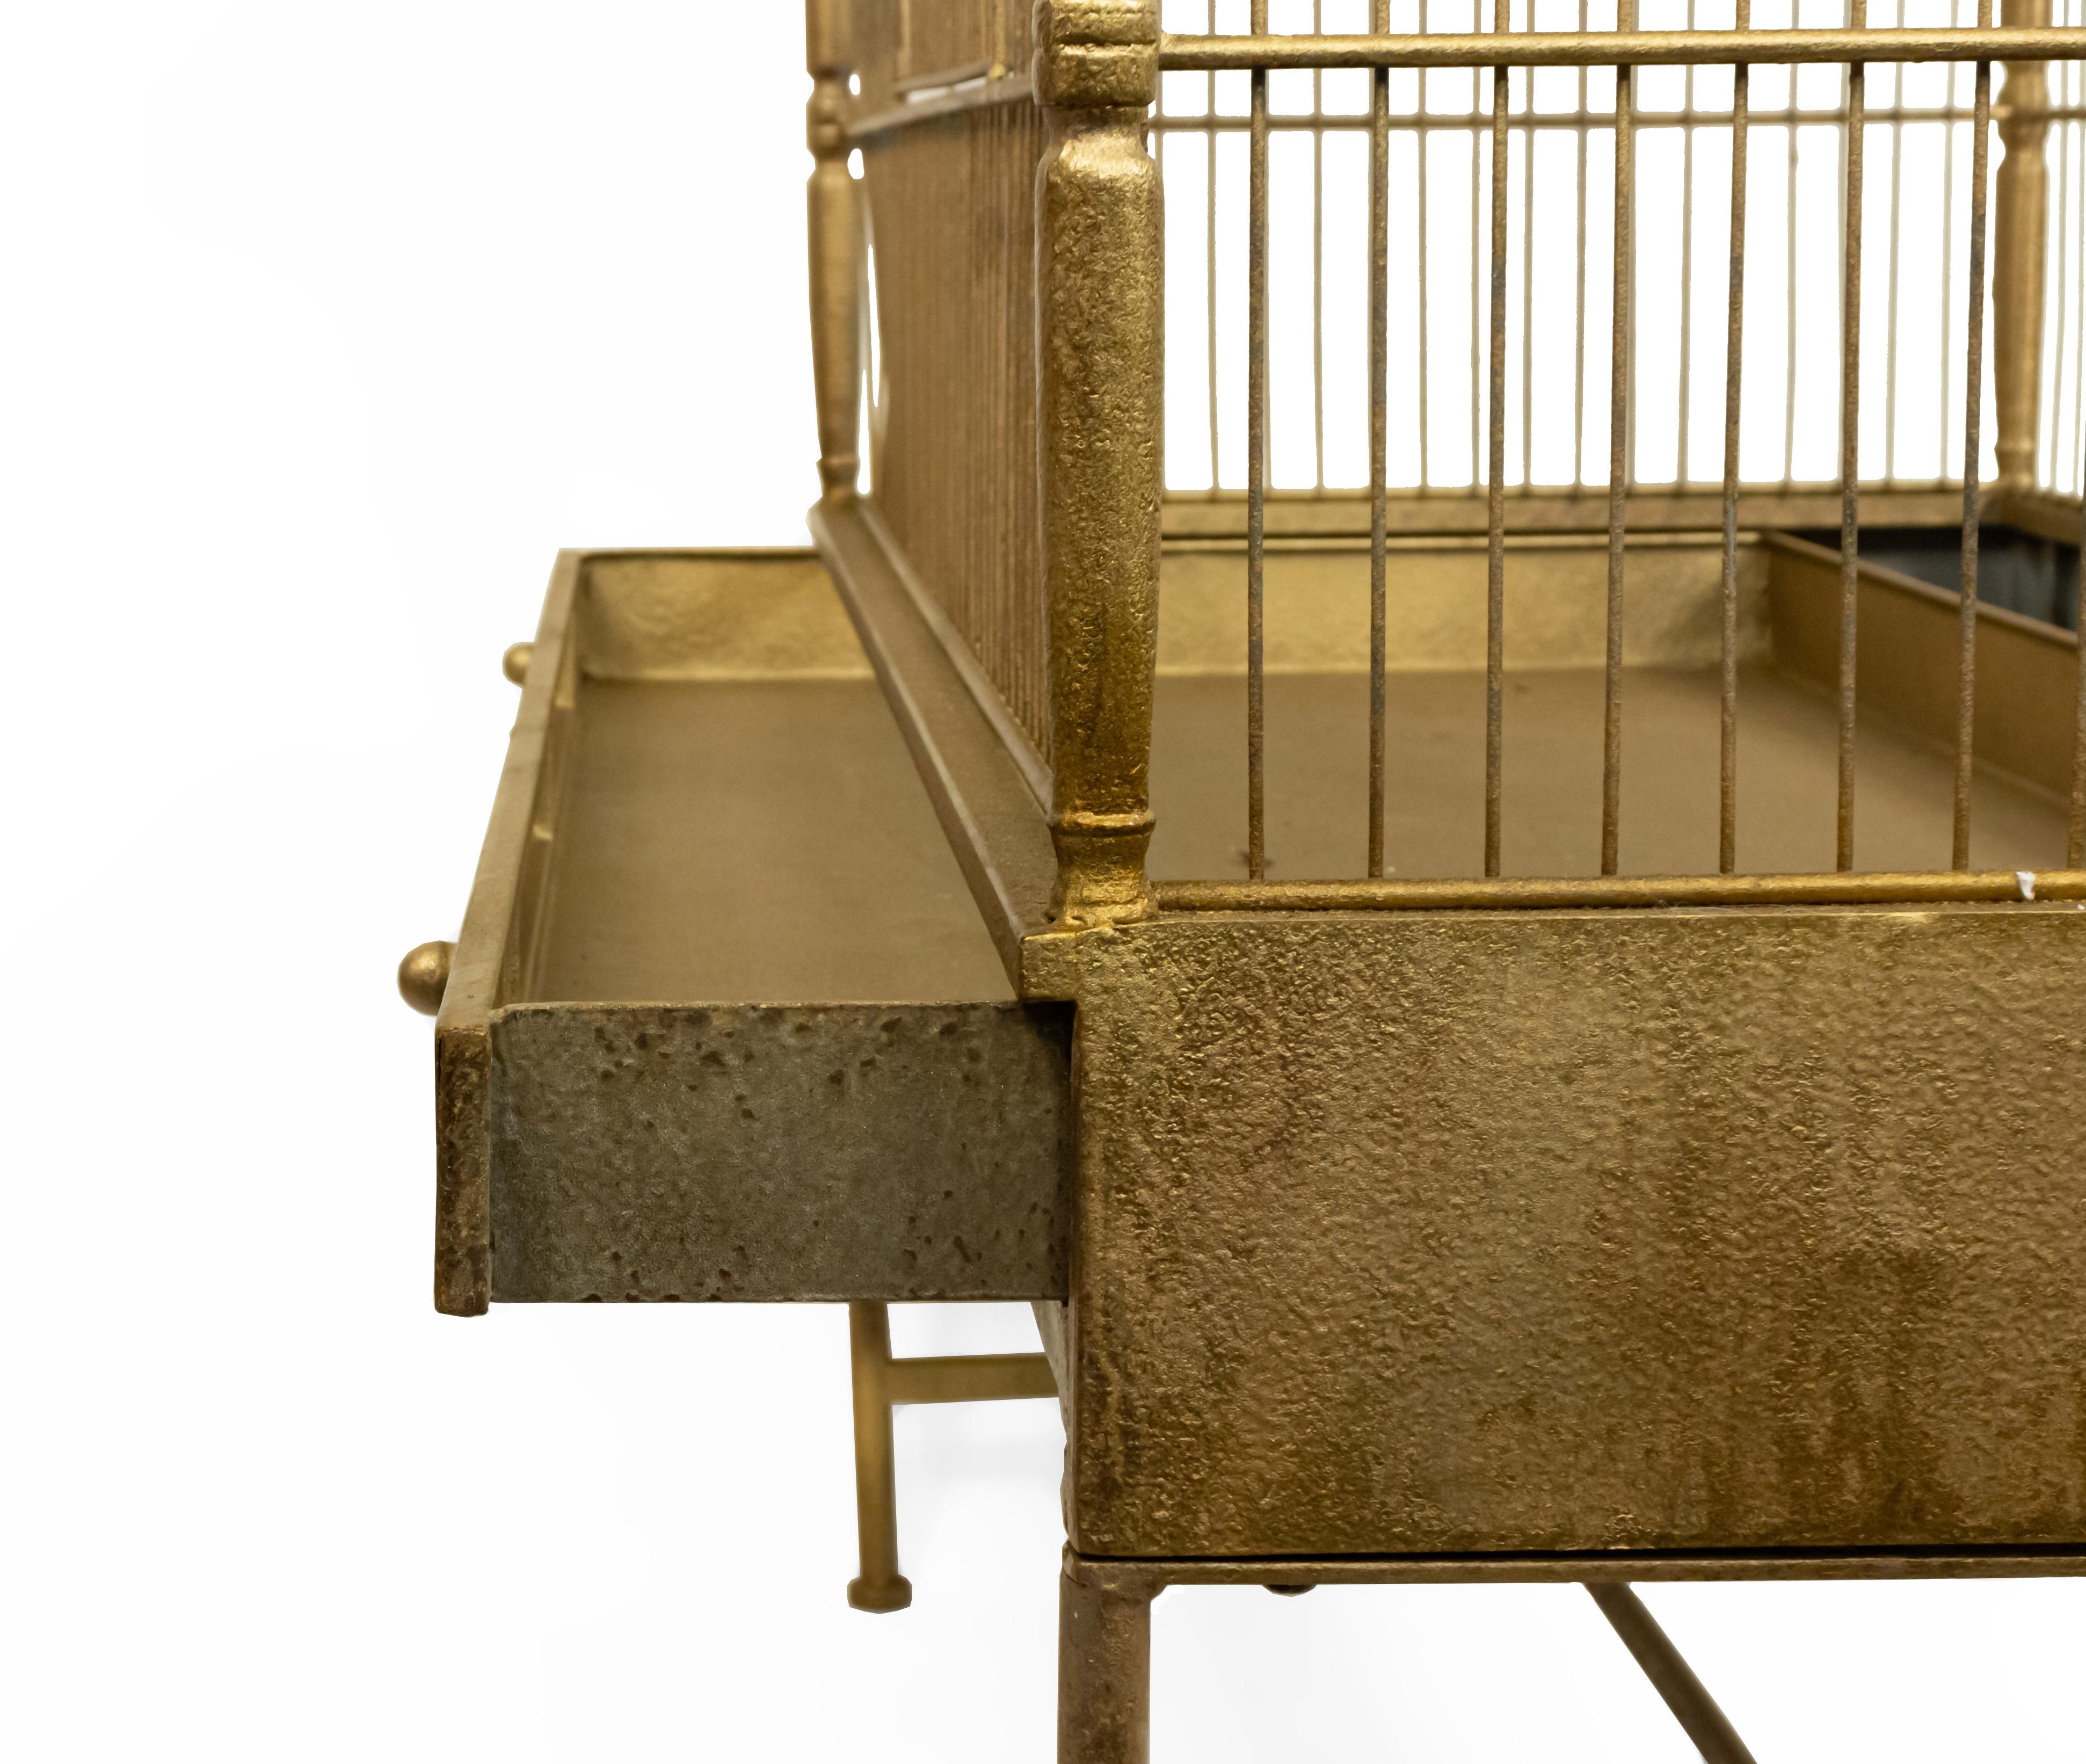 20th Century English Regency Style Gilt Metal 3 Compartment Bird Cage